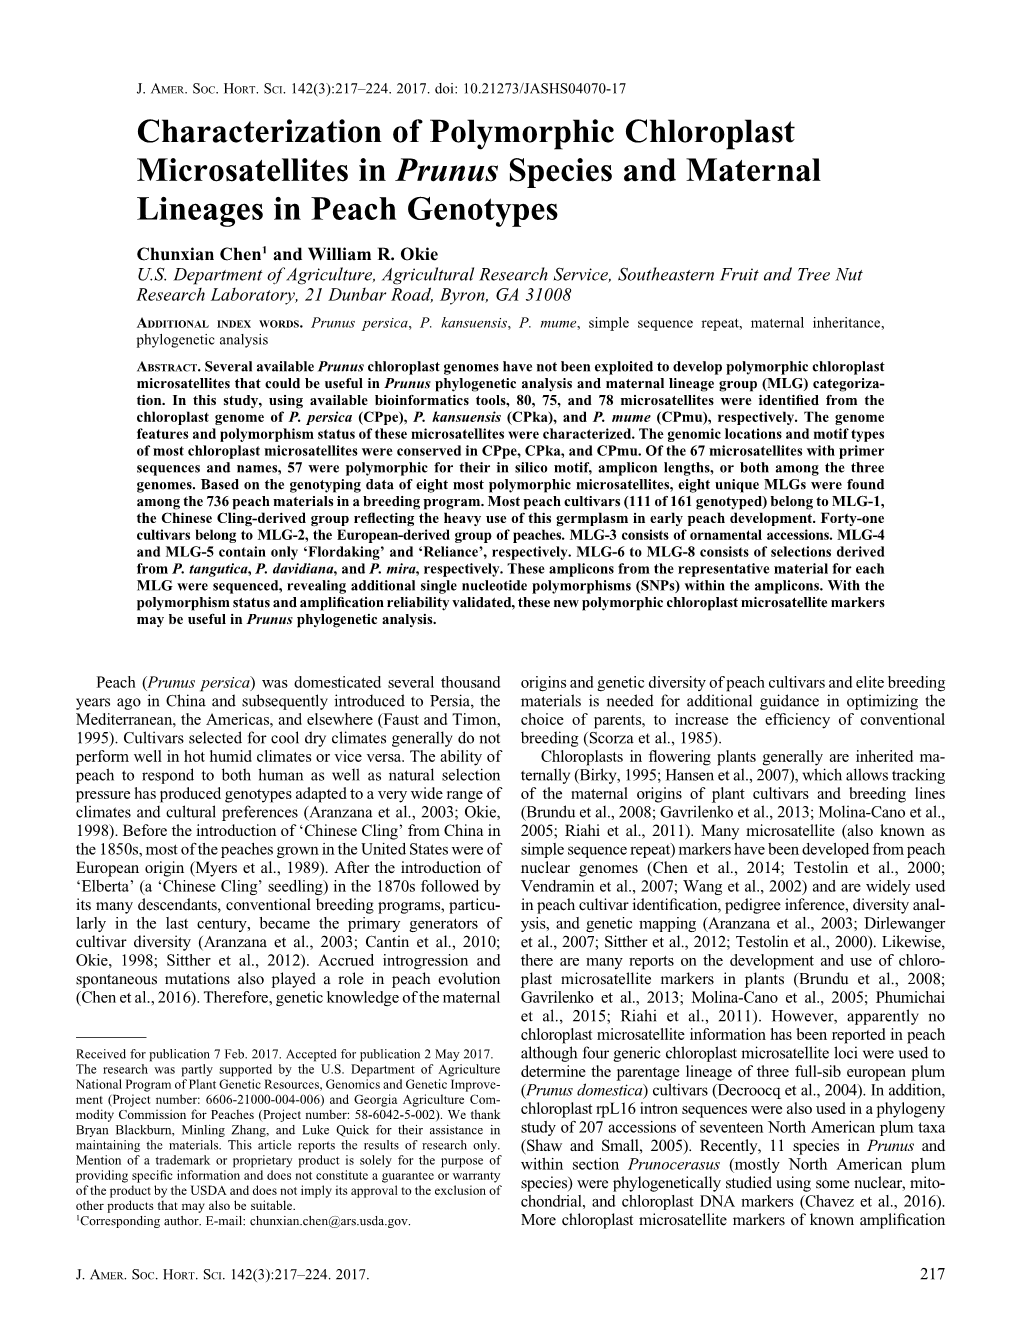 Characterization of Polymorphic Chloroplast Microsatellites in Prunus Species and Maternal Lineages in Peach Genotypes